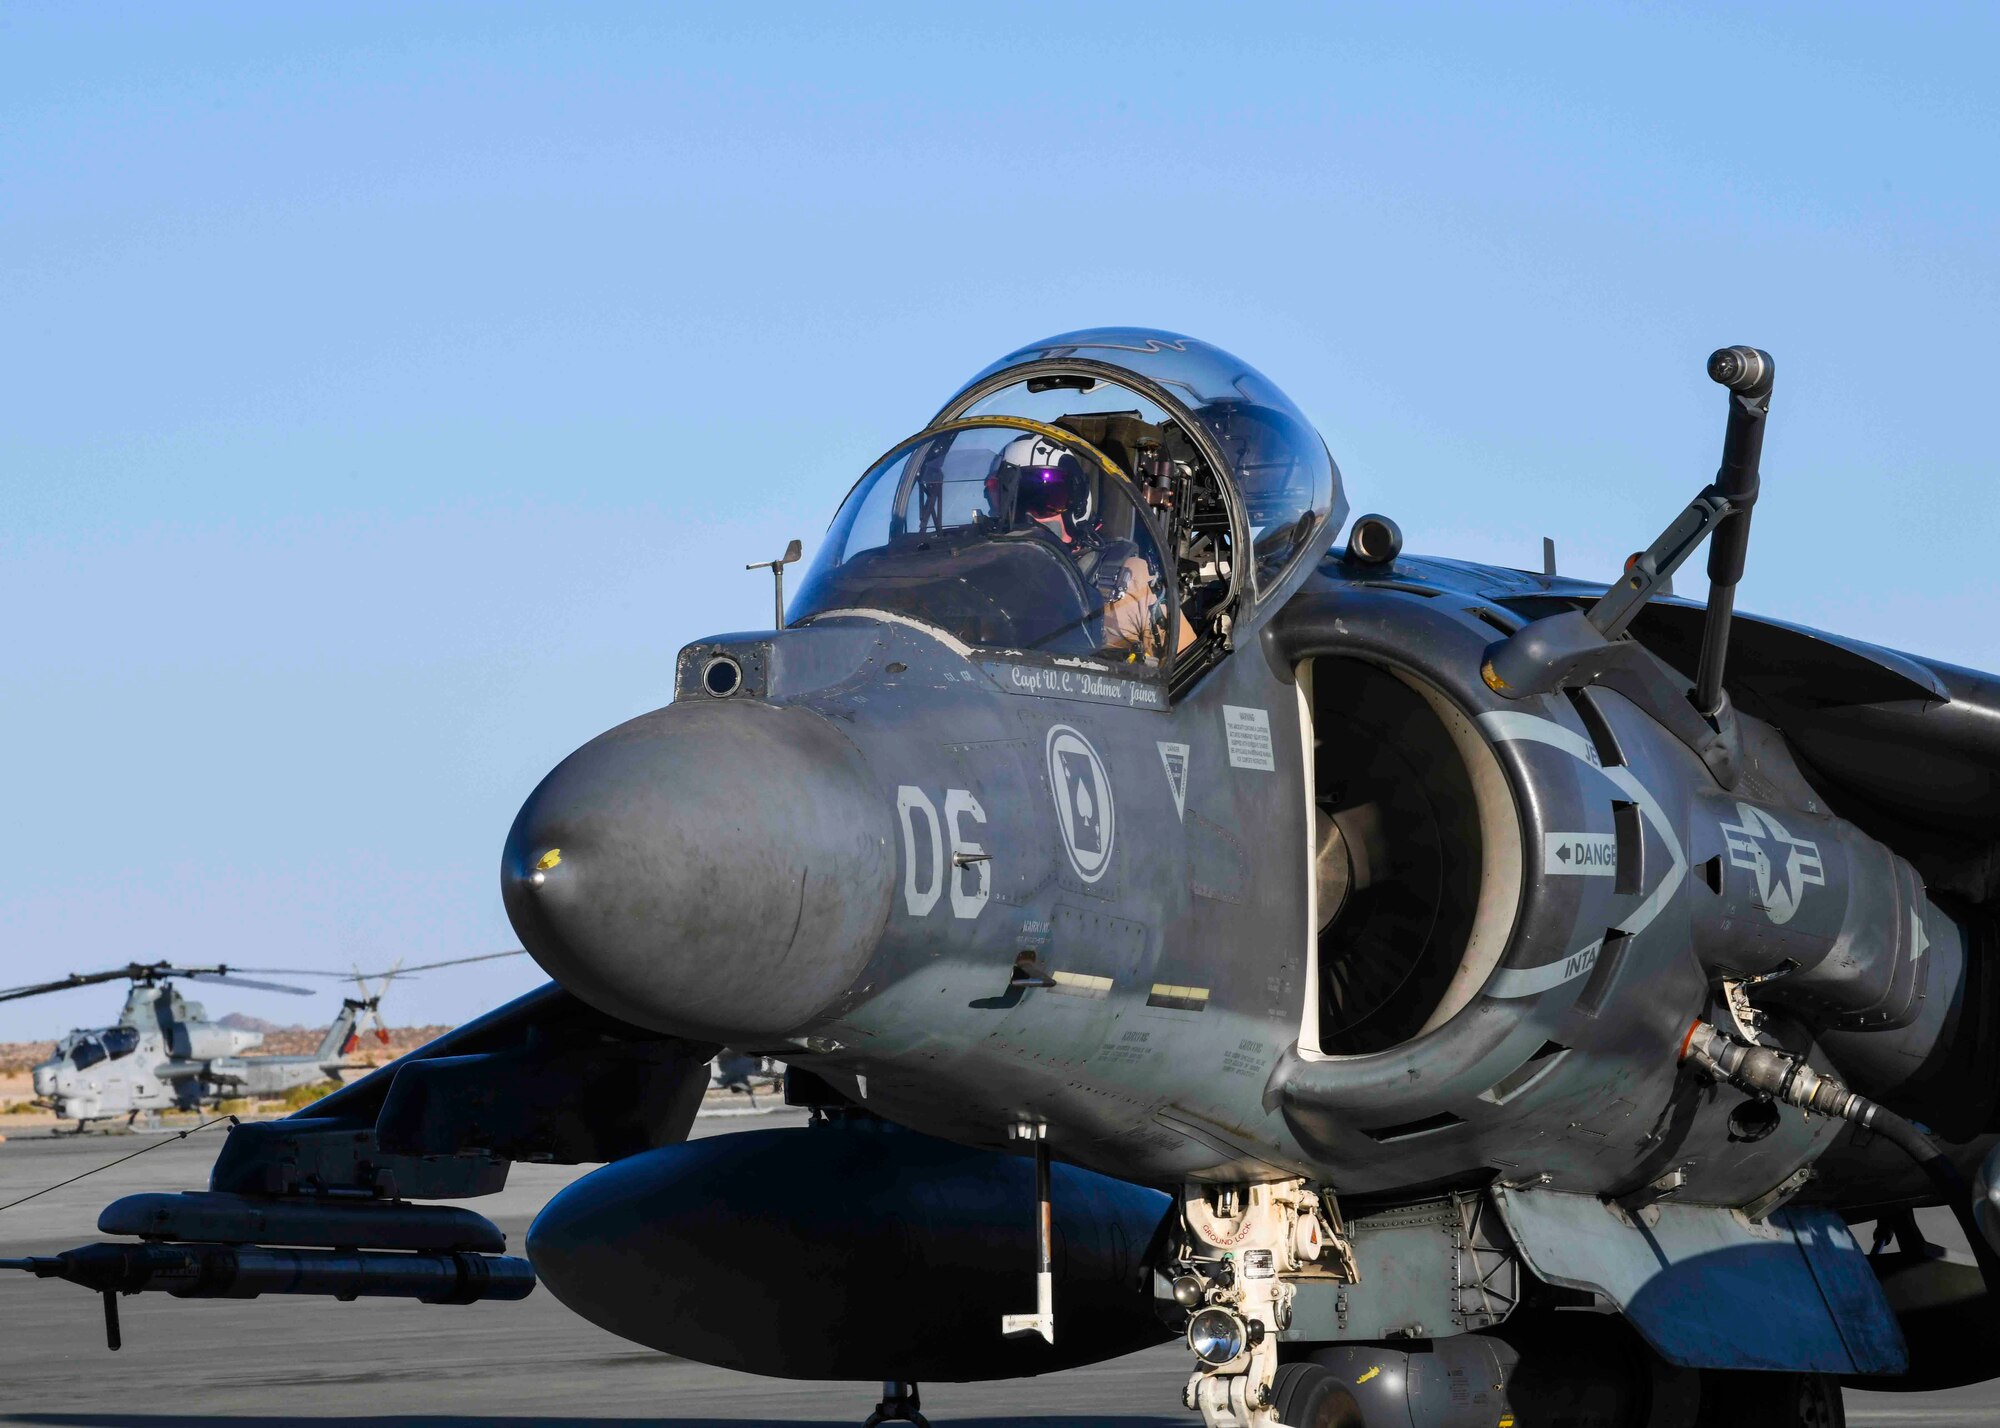 A U.S. Marine parks a Harrier Jump Jet to prepare for hot pit refueling during an exercise at Marine Corps Air Ground Combat Center, California, May 4, 2021. There were over 12,000 participants in this large-scale exercise including the Marine Corps, Air Force, Navy, and Army. (U.S. Air Force photo by Airman 1st Class Kiaundra Miller)